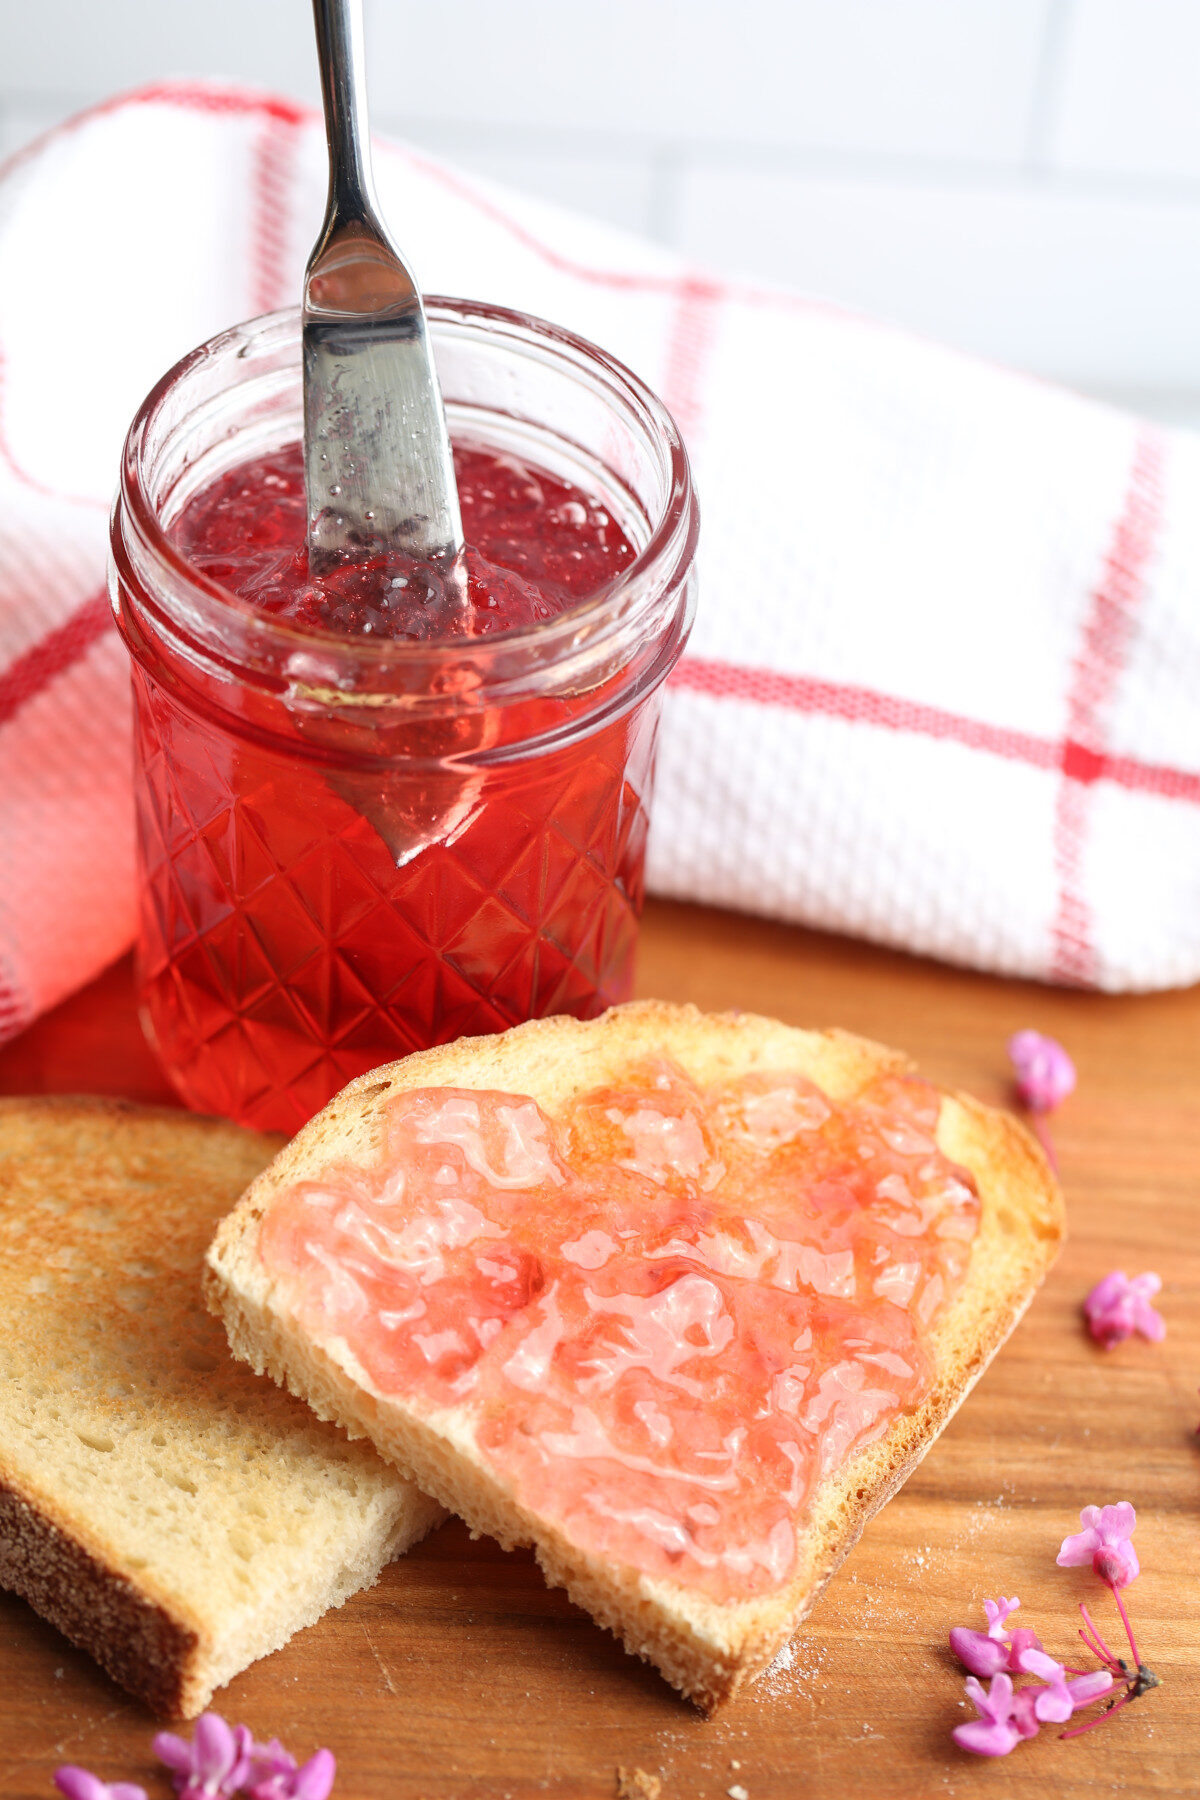 Redbud jelly in a jar with a piece of toast.